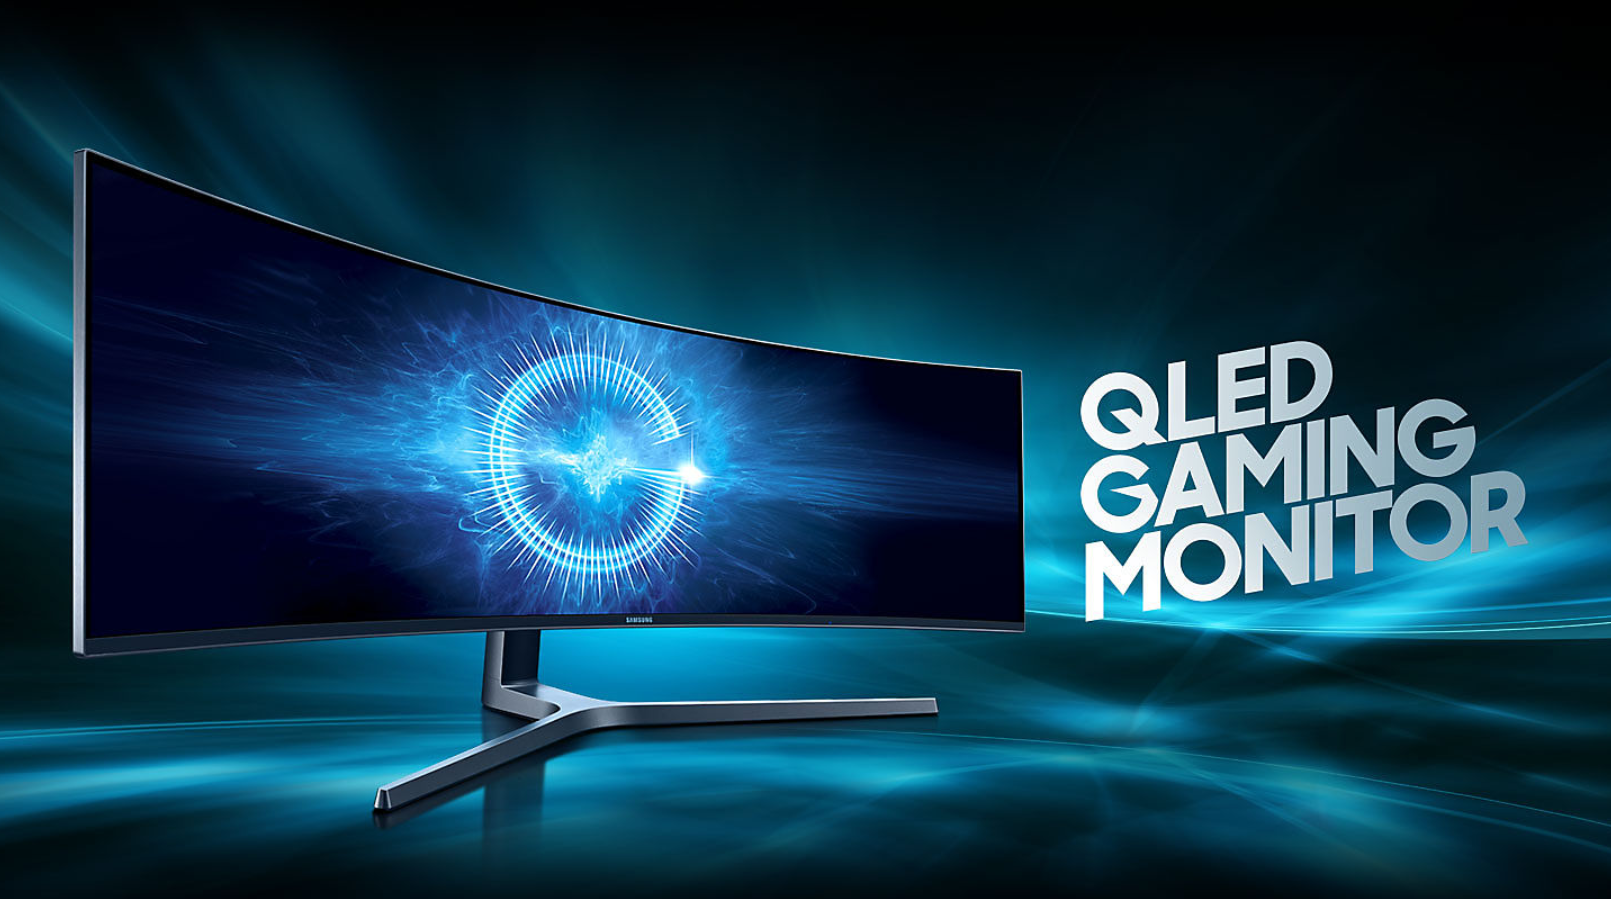 Samsung Malaysia Electronics releasing the world’s first 49-inch 32:9 ultra-wide gaming monitor for RM6499